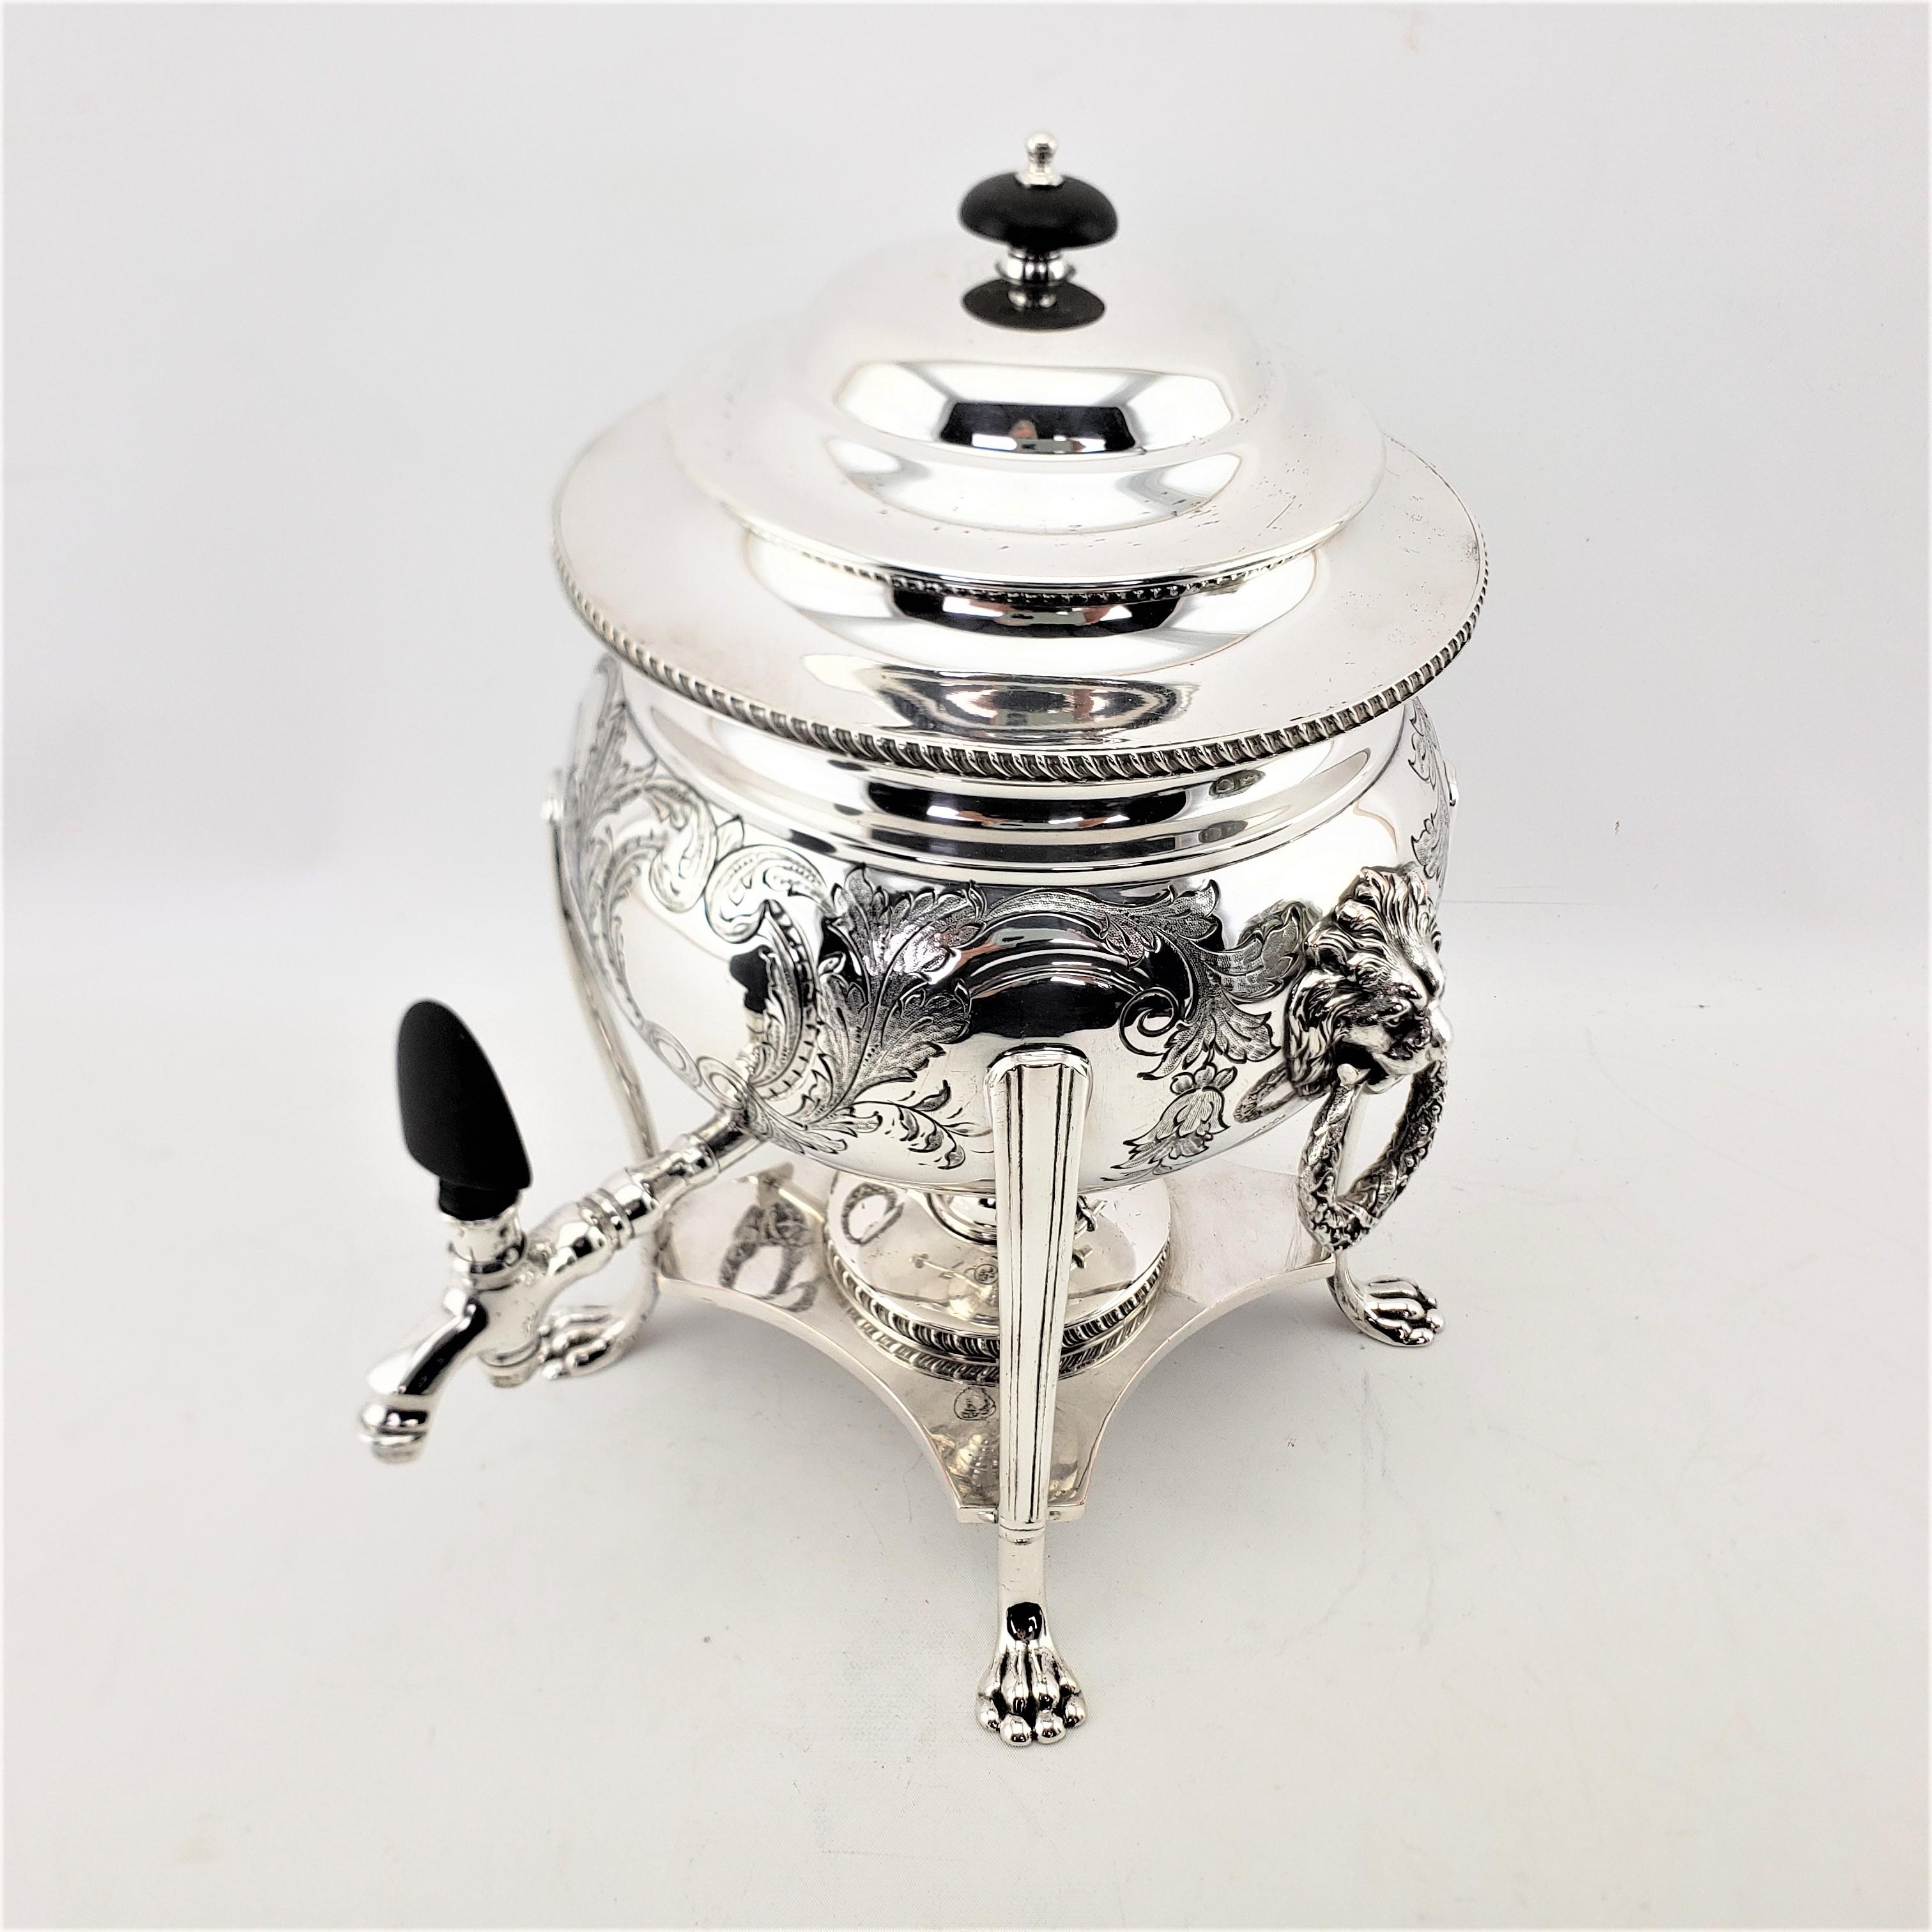 Victorian Antique English Silver Plated Tea or Hot Water Urn with Lion Mounts & Engraving